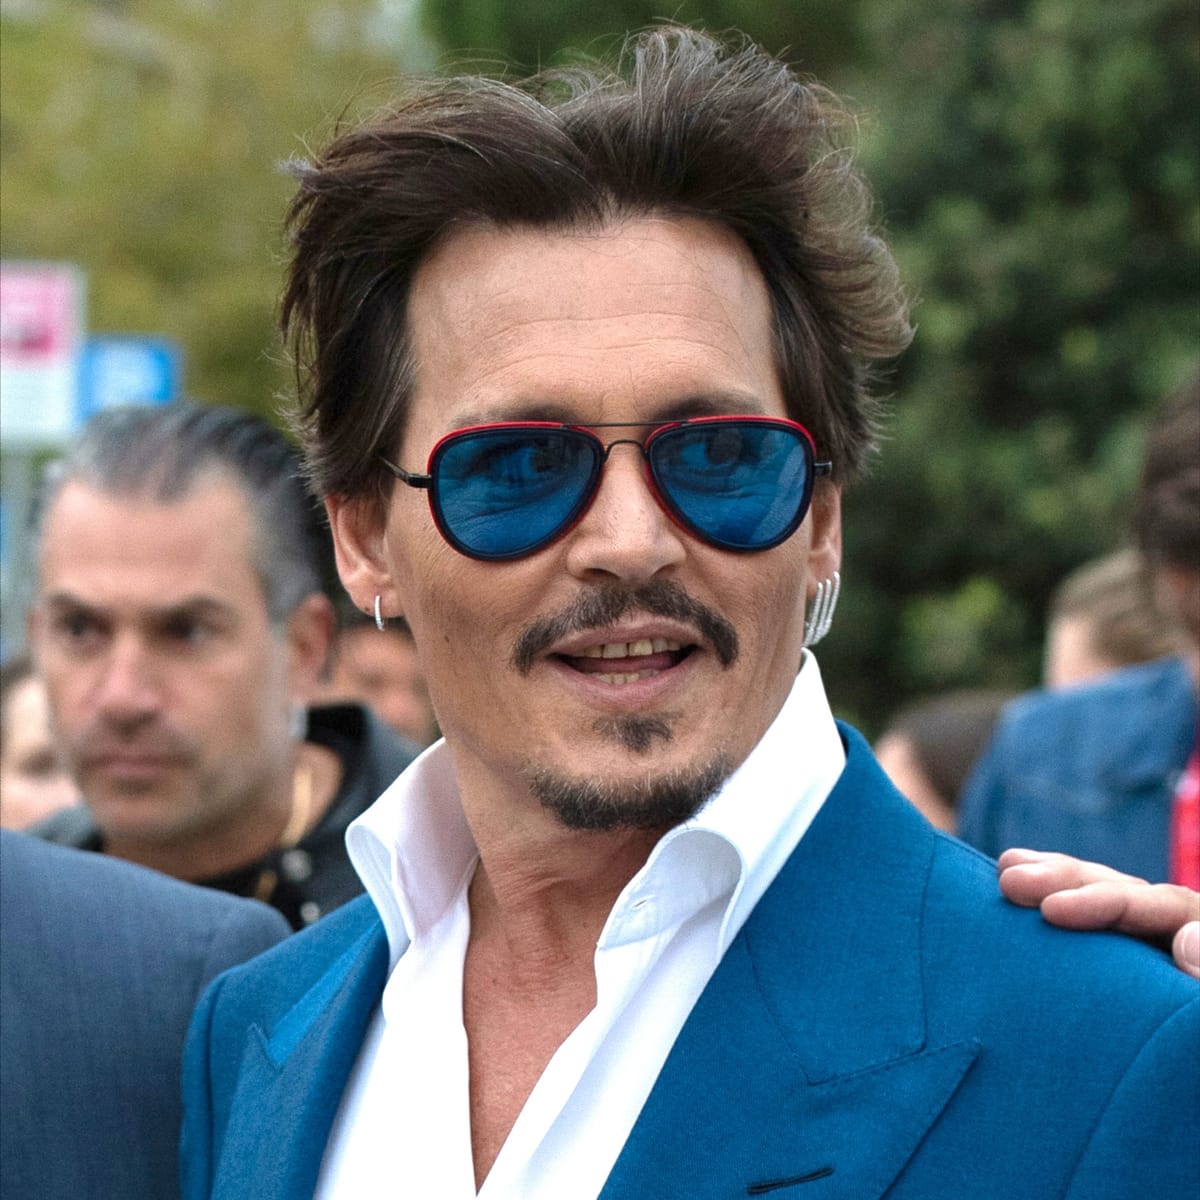 Some fans believe Johnny Depp's teeth have deteriorated due to smoking and substance abuse